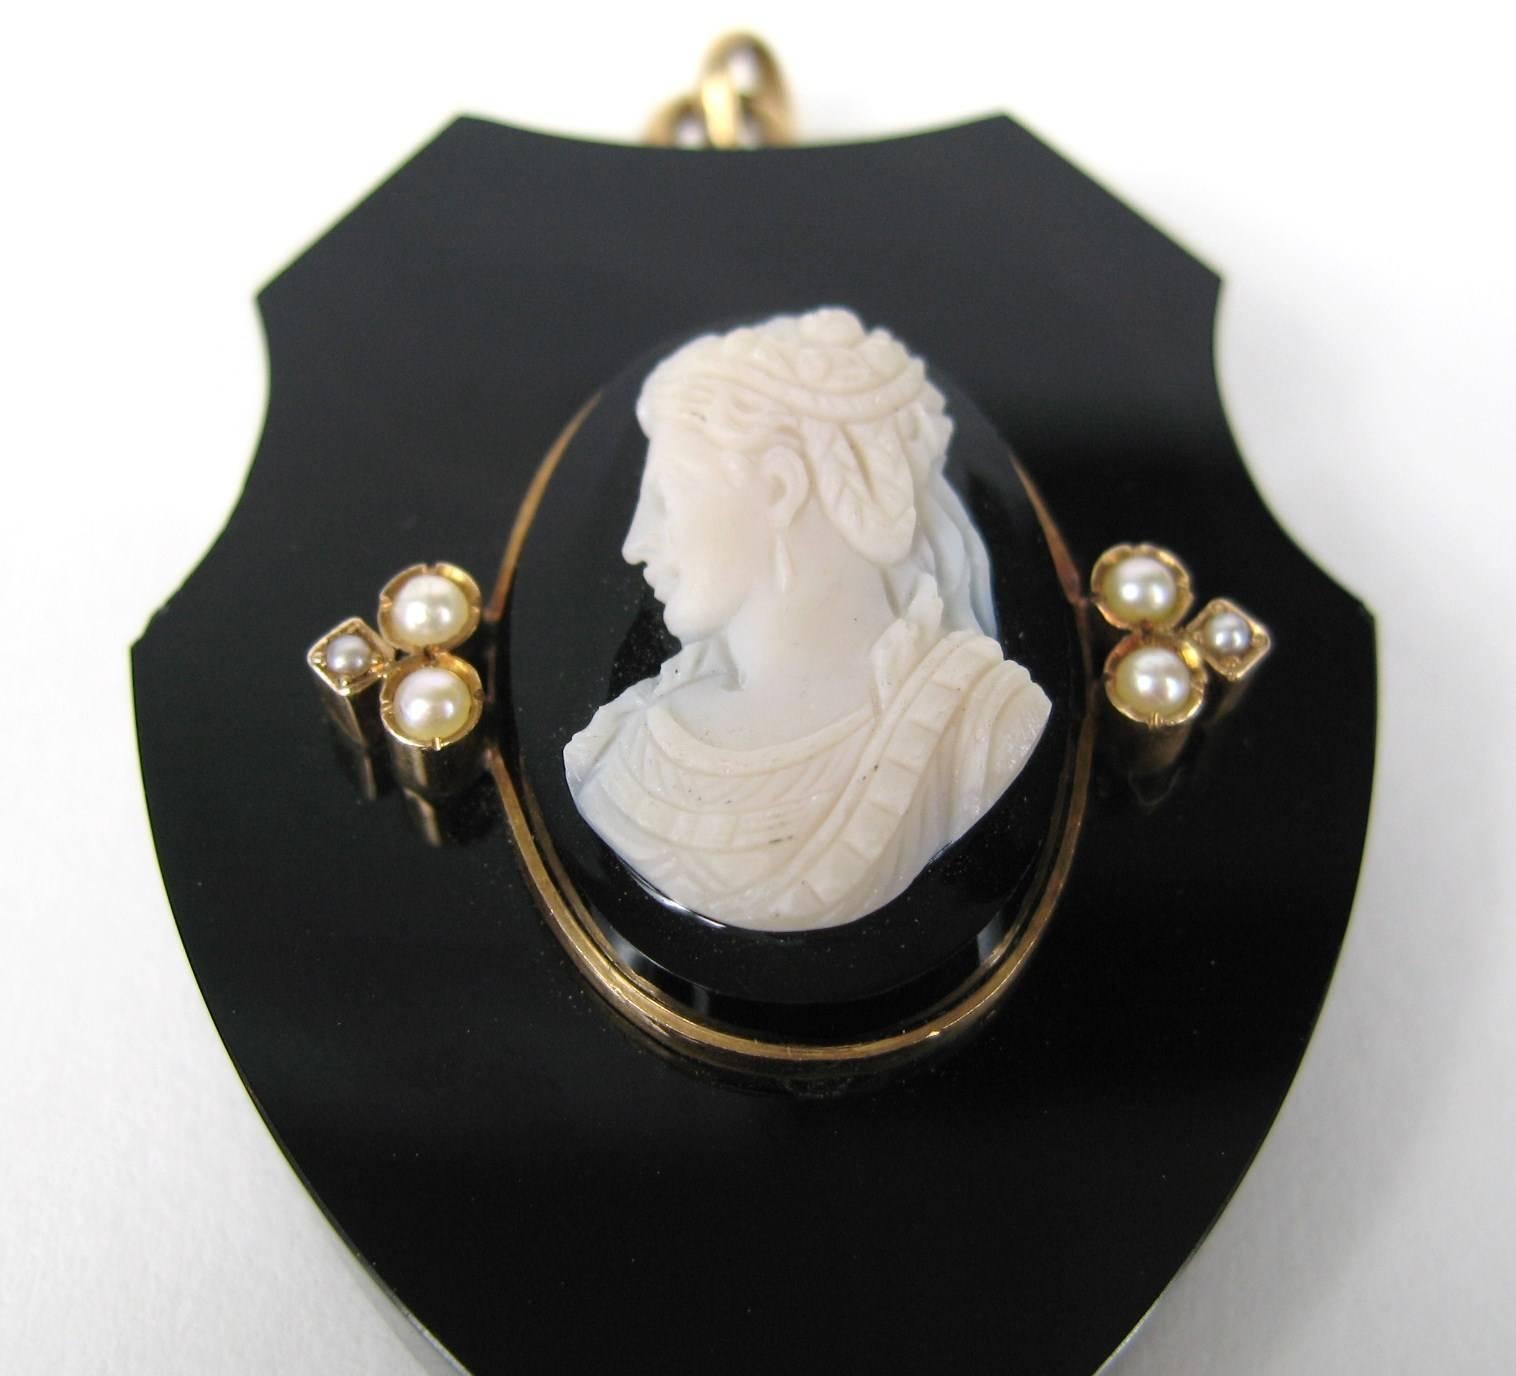 Black jet Victorian 14k Gold locket with Gold detailing. Seed Pearl accents. Finely detailed Cameo. Measuring 2.00 in x 1.40 in. This is out of a massive collection of Hopi, Zuni, Navajo, Southwestern, sterling silver, costume jewelry and fine